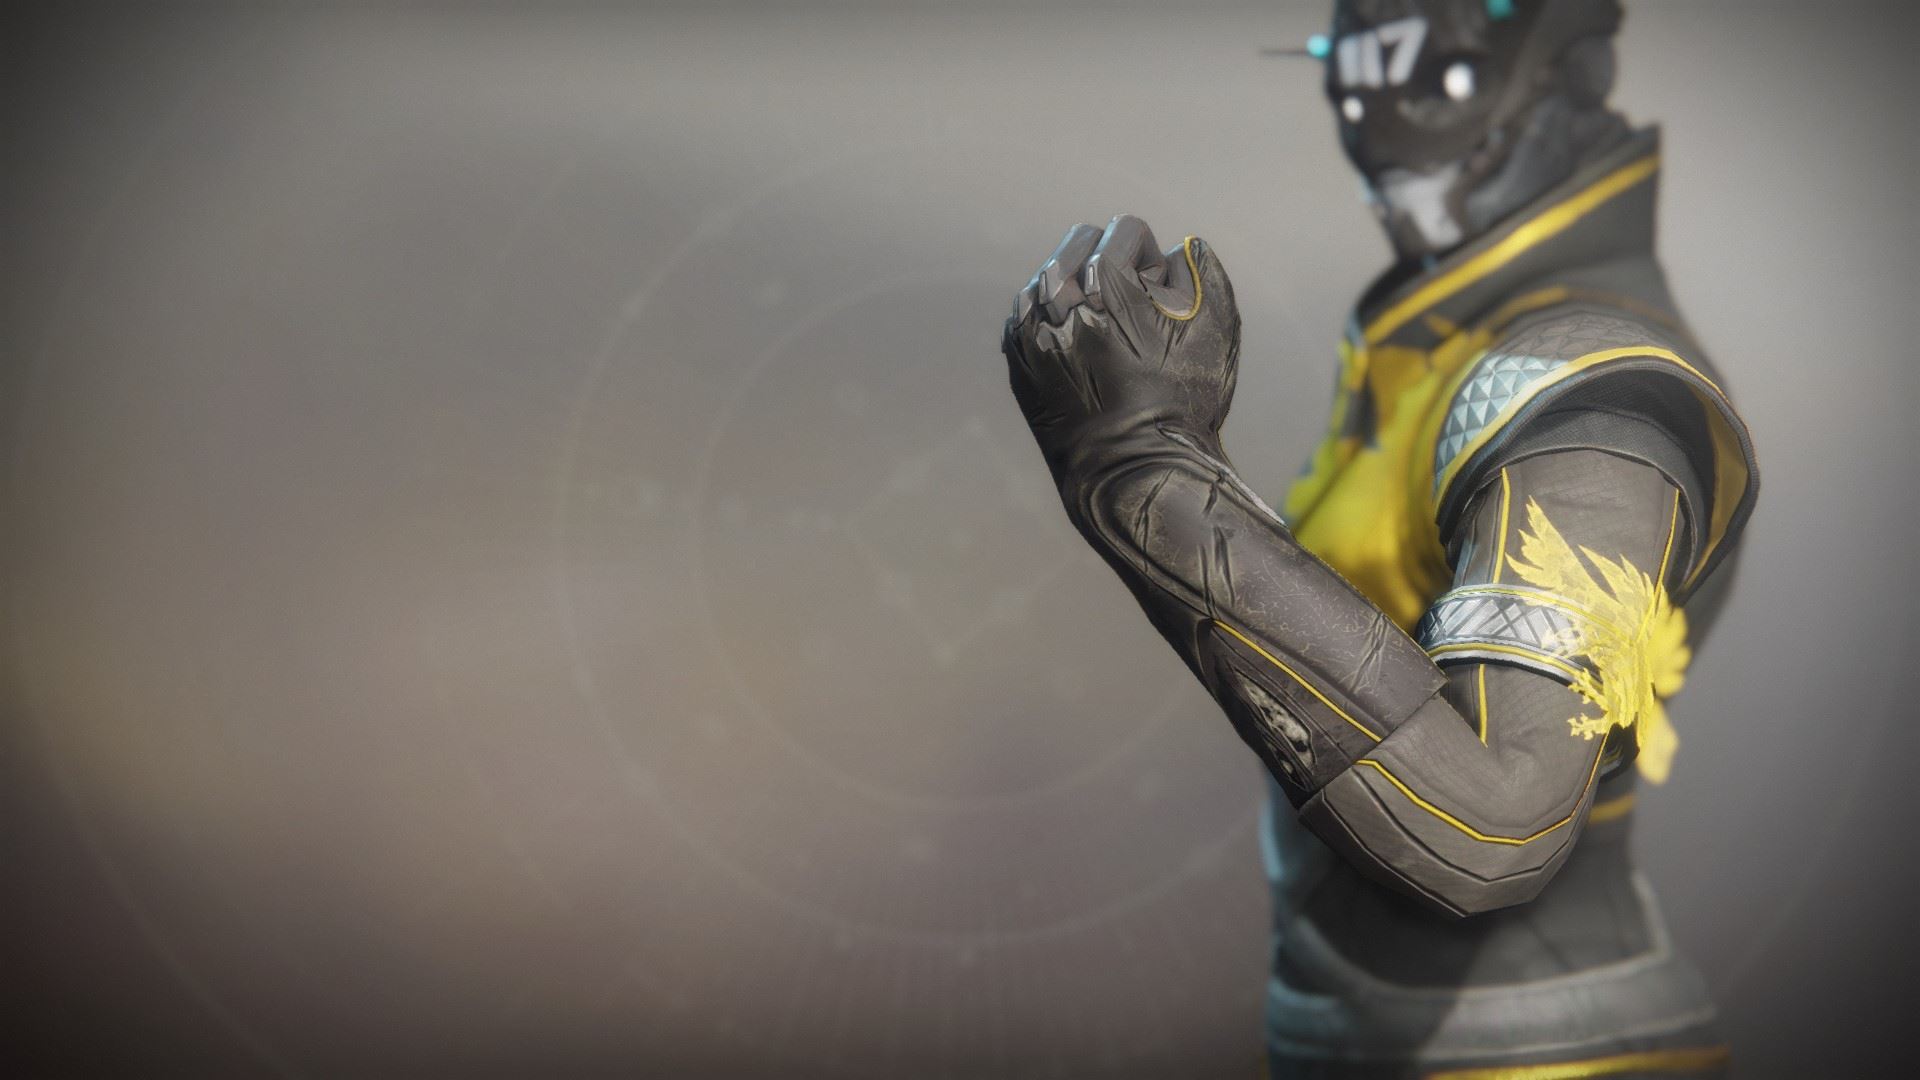 An in-game render of the Solstice Gloves (Scorched).